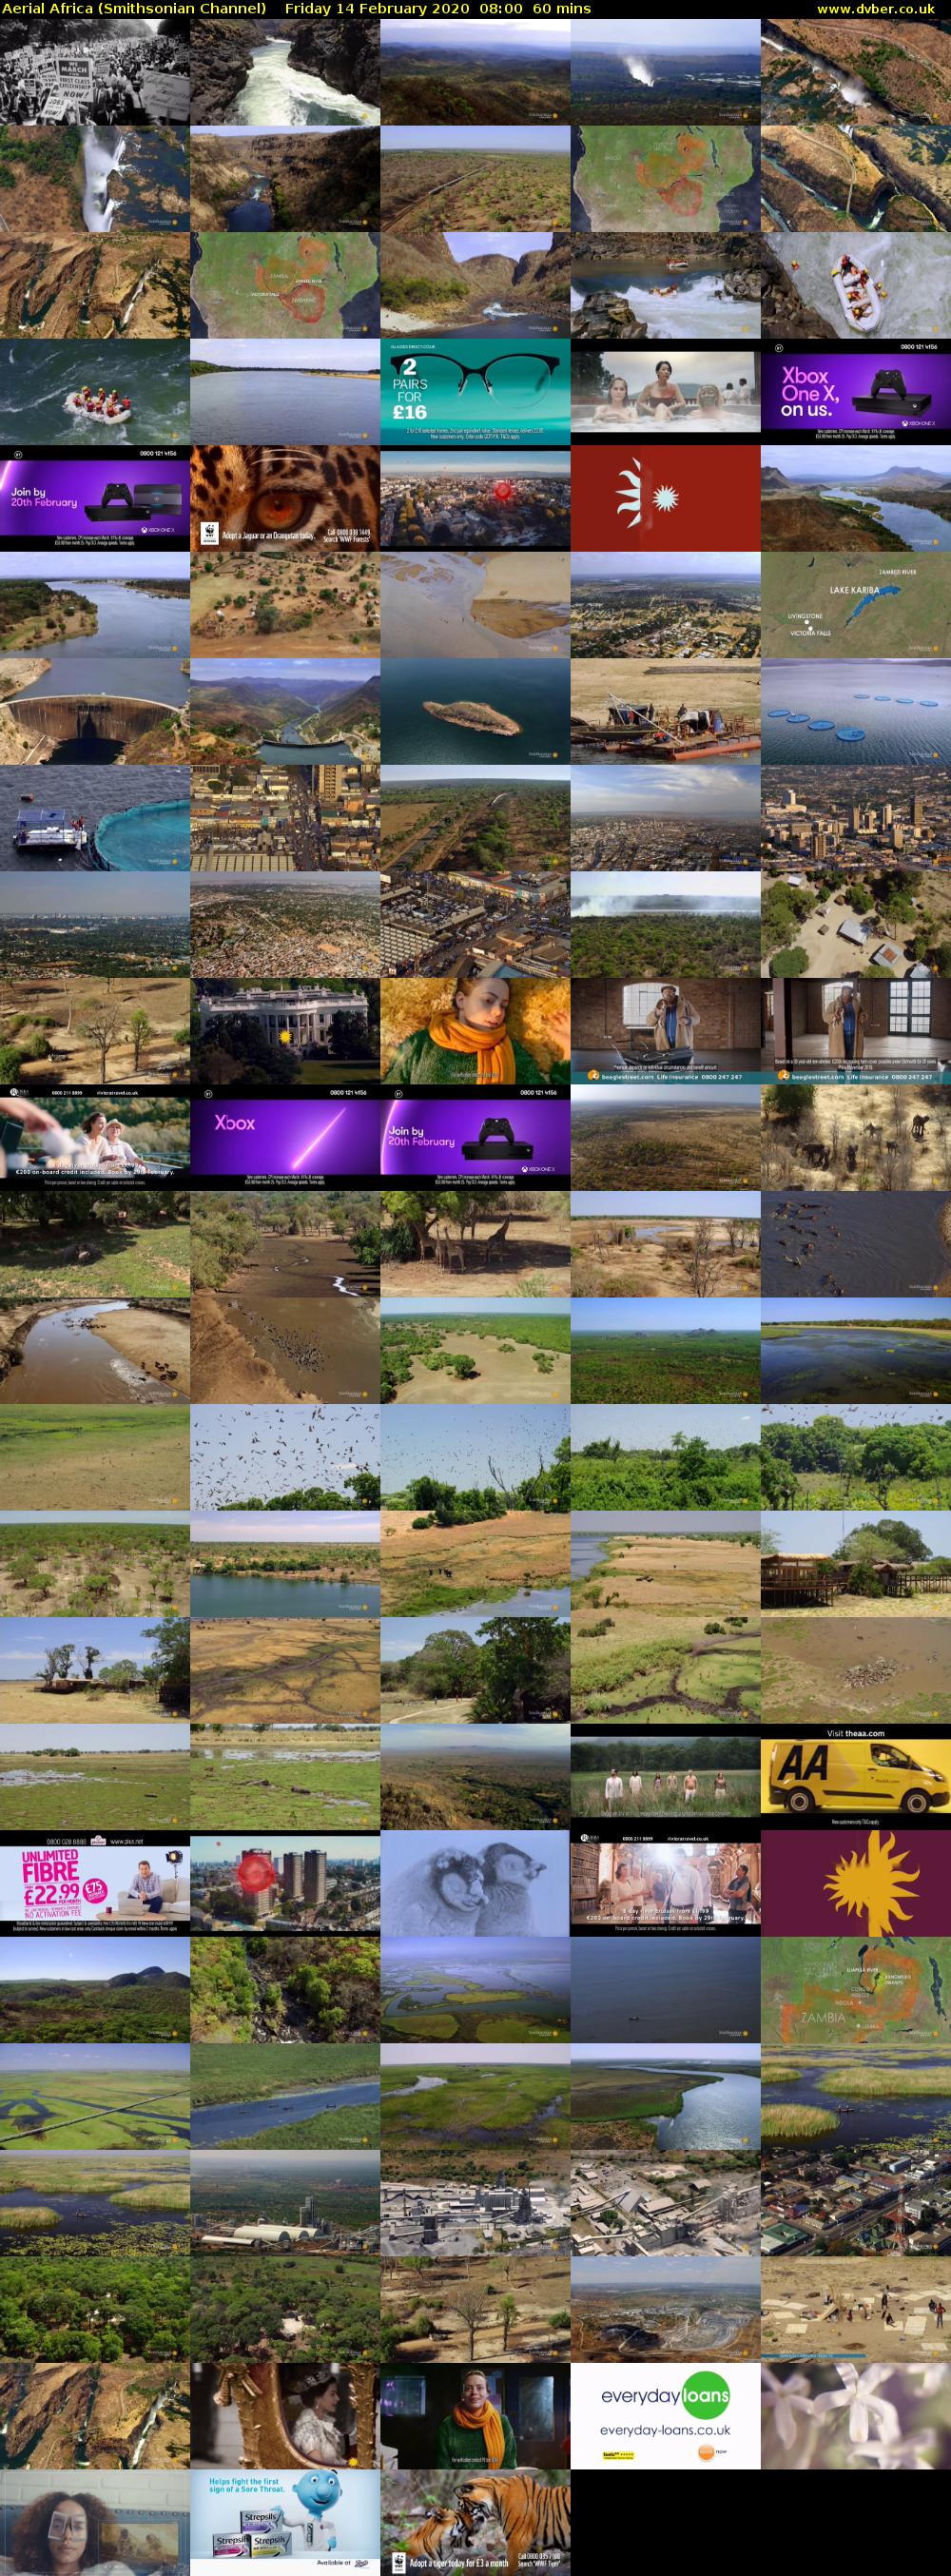 Aerial Africa (Smithsonian Channel) Friday 14 February 2020 08:00 - 09:00